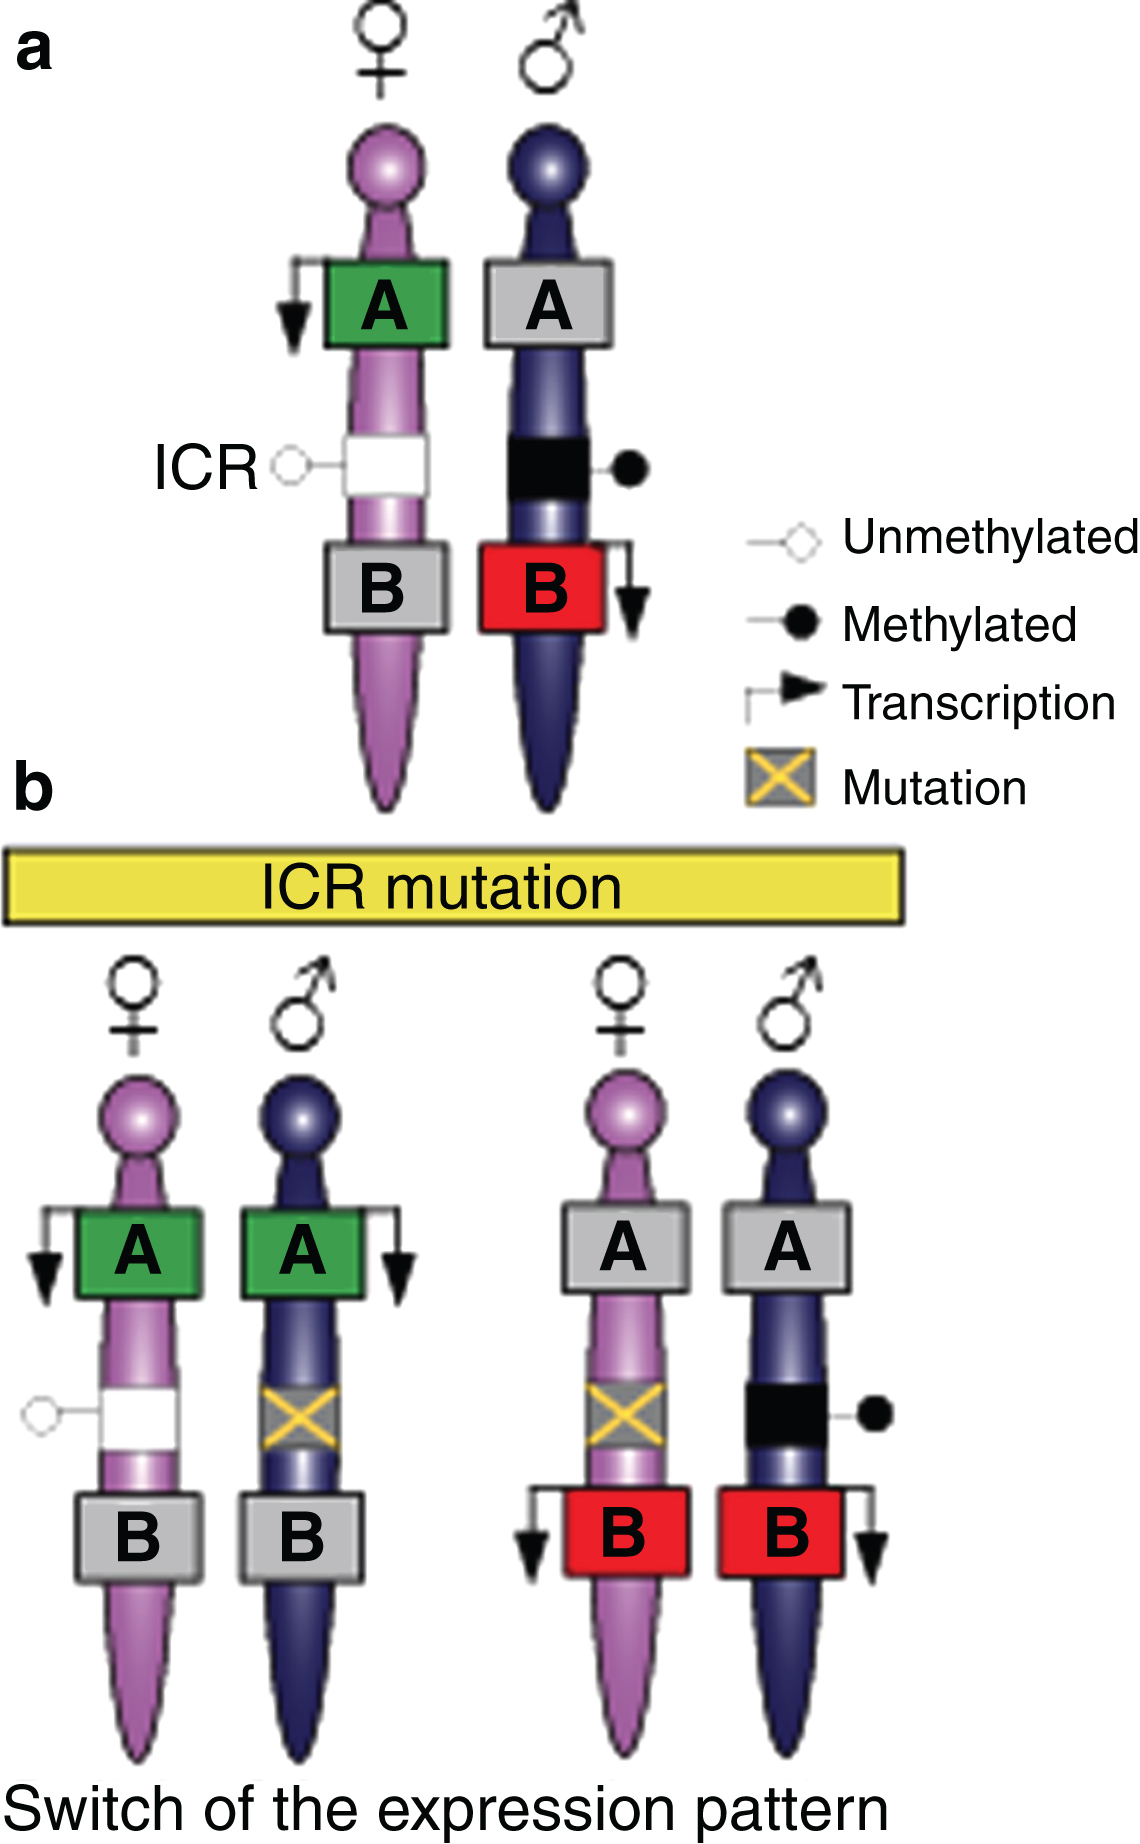 Imprinted genes are located in clusters that are under the control of the imprinting control region (ICR). (a) Mammalian somatic cells contain a maternally-inherited chromosome (pink) and a paternally-inherited chromosome (blue). Imprinted genes are located in clusters and can be expressed in the maternally-inherited chromosome and repressed from the paternally-inherited chromosome (green box A), or expressed in the paternally-inherited chromosomes and repressed from the maternally inherited chromosome (red box B). Imprinting in the cluster is regulated by a DNA element called the imprinting control region (ICR) that has differentially-methylated regions (DMRs) on the two parental chromosomes. (b) Mutations in the ICR can modify imprinting, thus affecting several genes in the cluster and resulting in a switch in the expression patterns with the paternally-inherited chromosome, thereby acquiring an epigenotype typical in the maternally-inherited chromosome, or vice versa.
